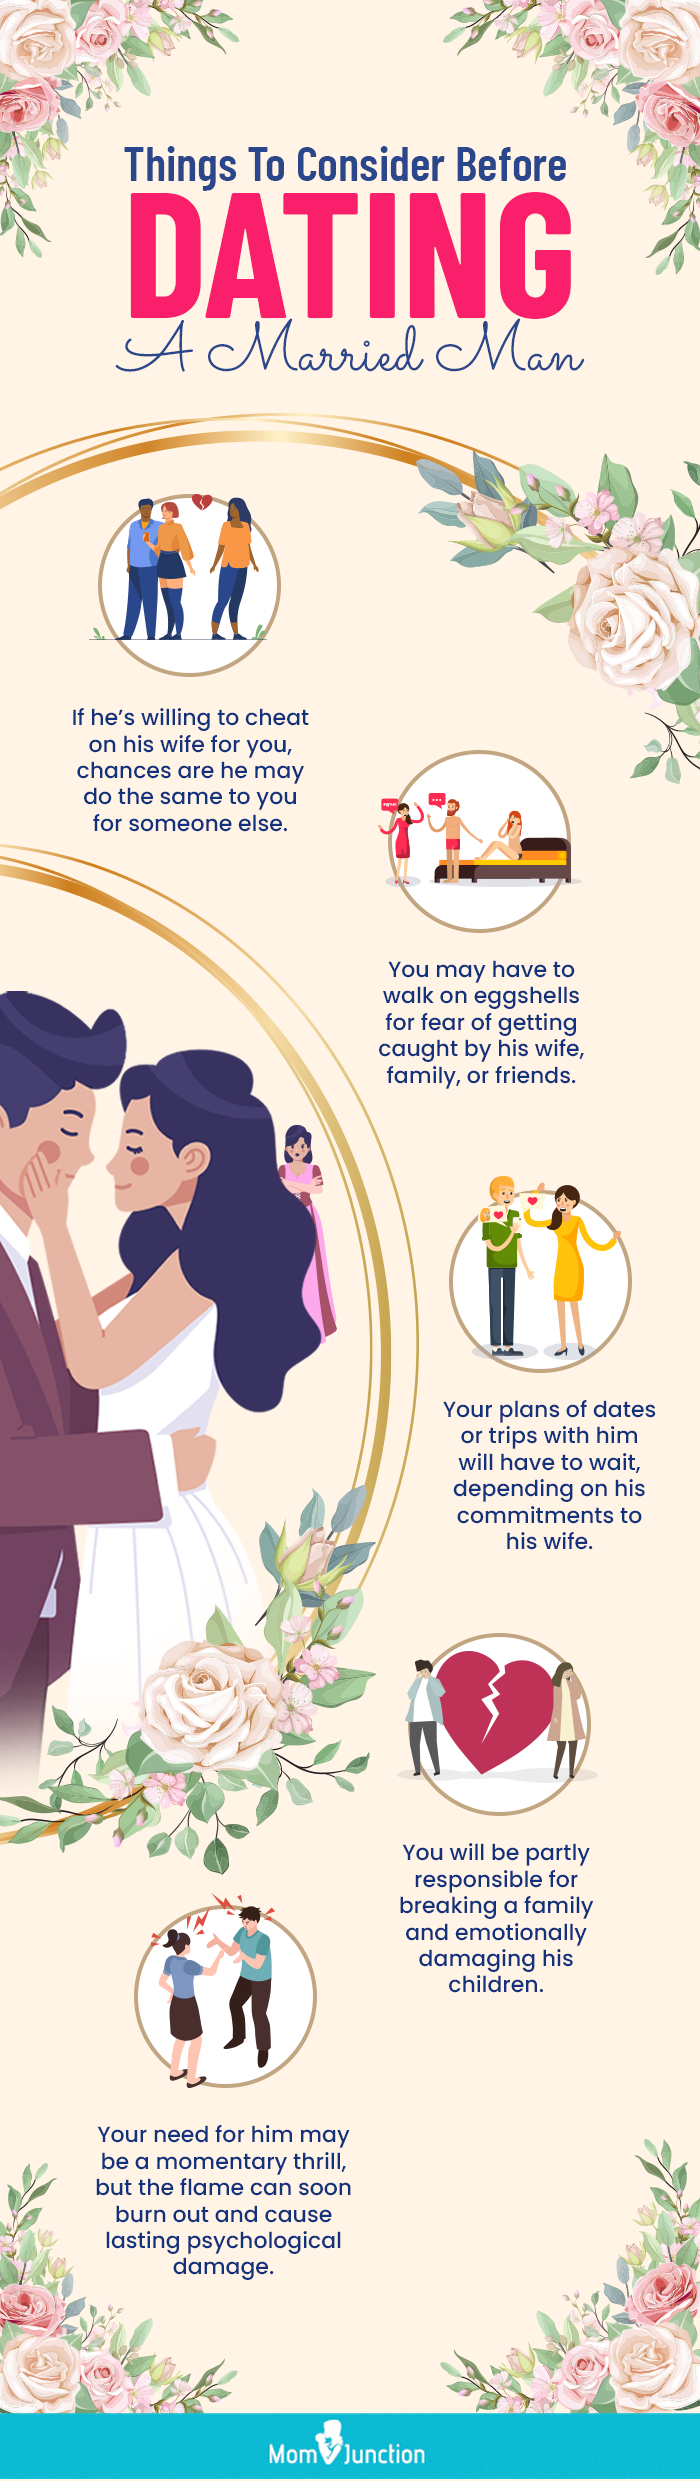 things to consider before dating a married man [infographic]